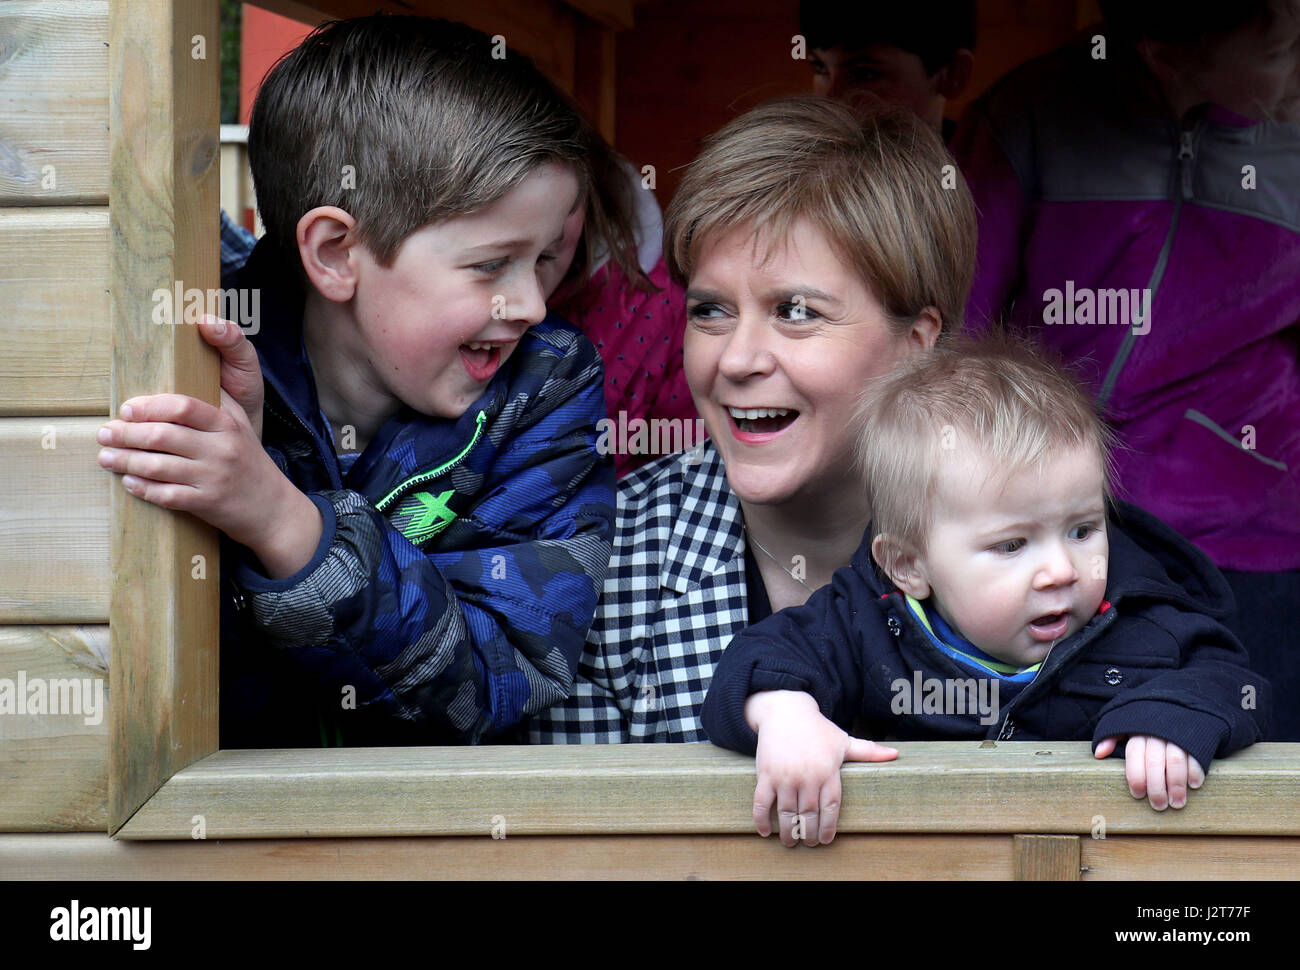 SNP leader Nicola Sturgeon with Scott Ruddick, 7, (left) and his baby brother Alastair Ruddick, 9 months, during a visit to to the Dreams Daycare nursery in Insch, Aberdeenshire, on the election campaign trail. Stock Photo